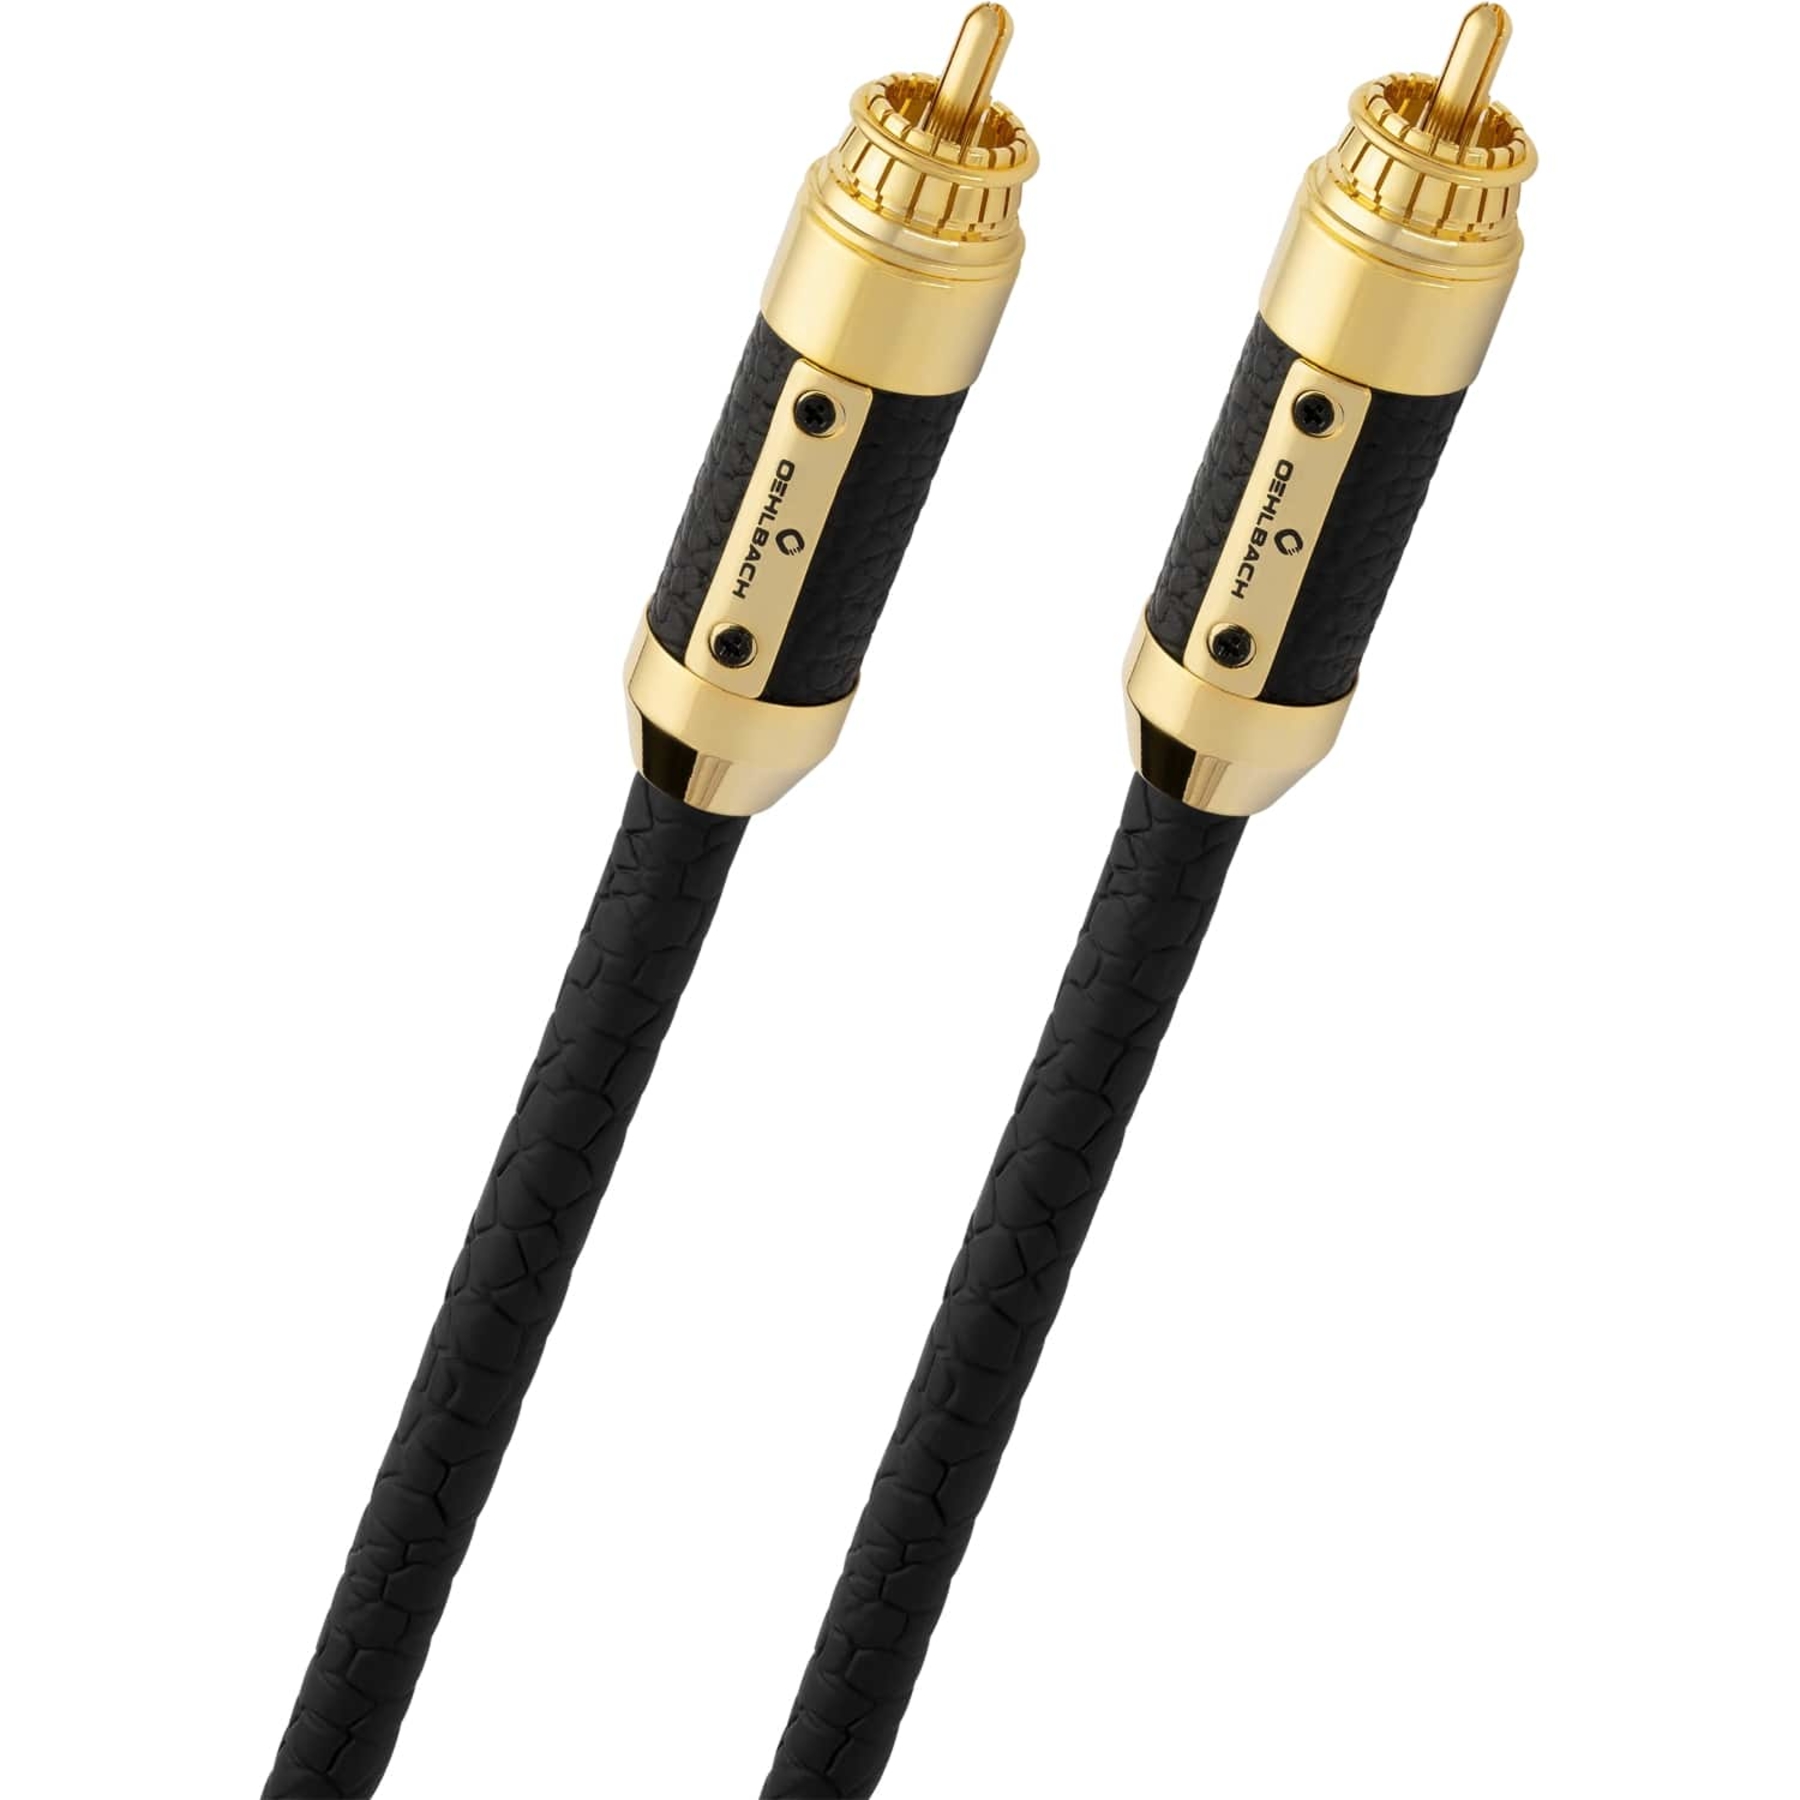 Кабели межблочные аудио Oehlbach STATE OF THE ART XXL Black Connection Cable RCA, 1x1,0m, gold, D1C13826 кабели межблочные аудио oehlbach state of the art xxl cable xlr 2x1 50m gold d1c13134